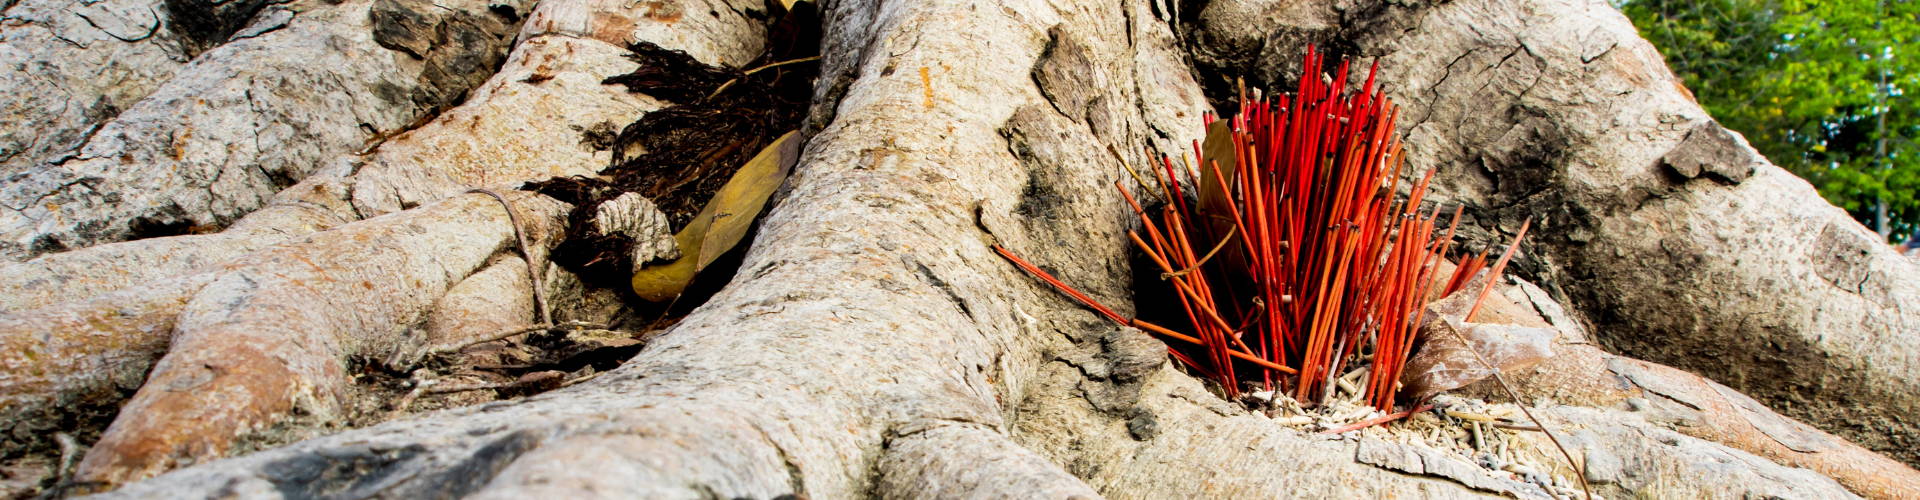 roots for incense